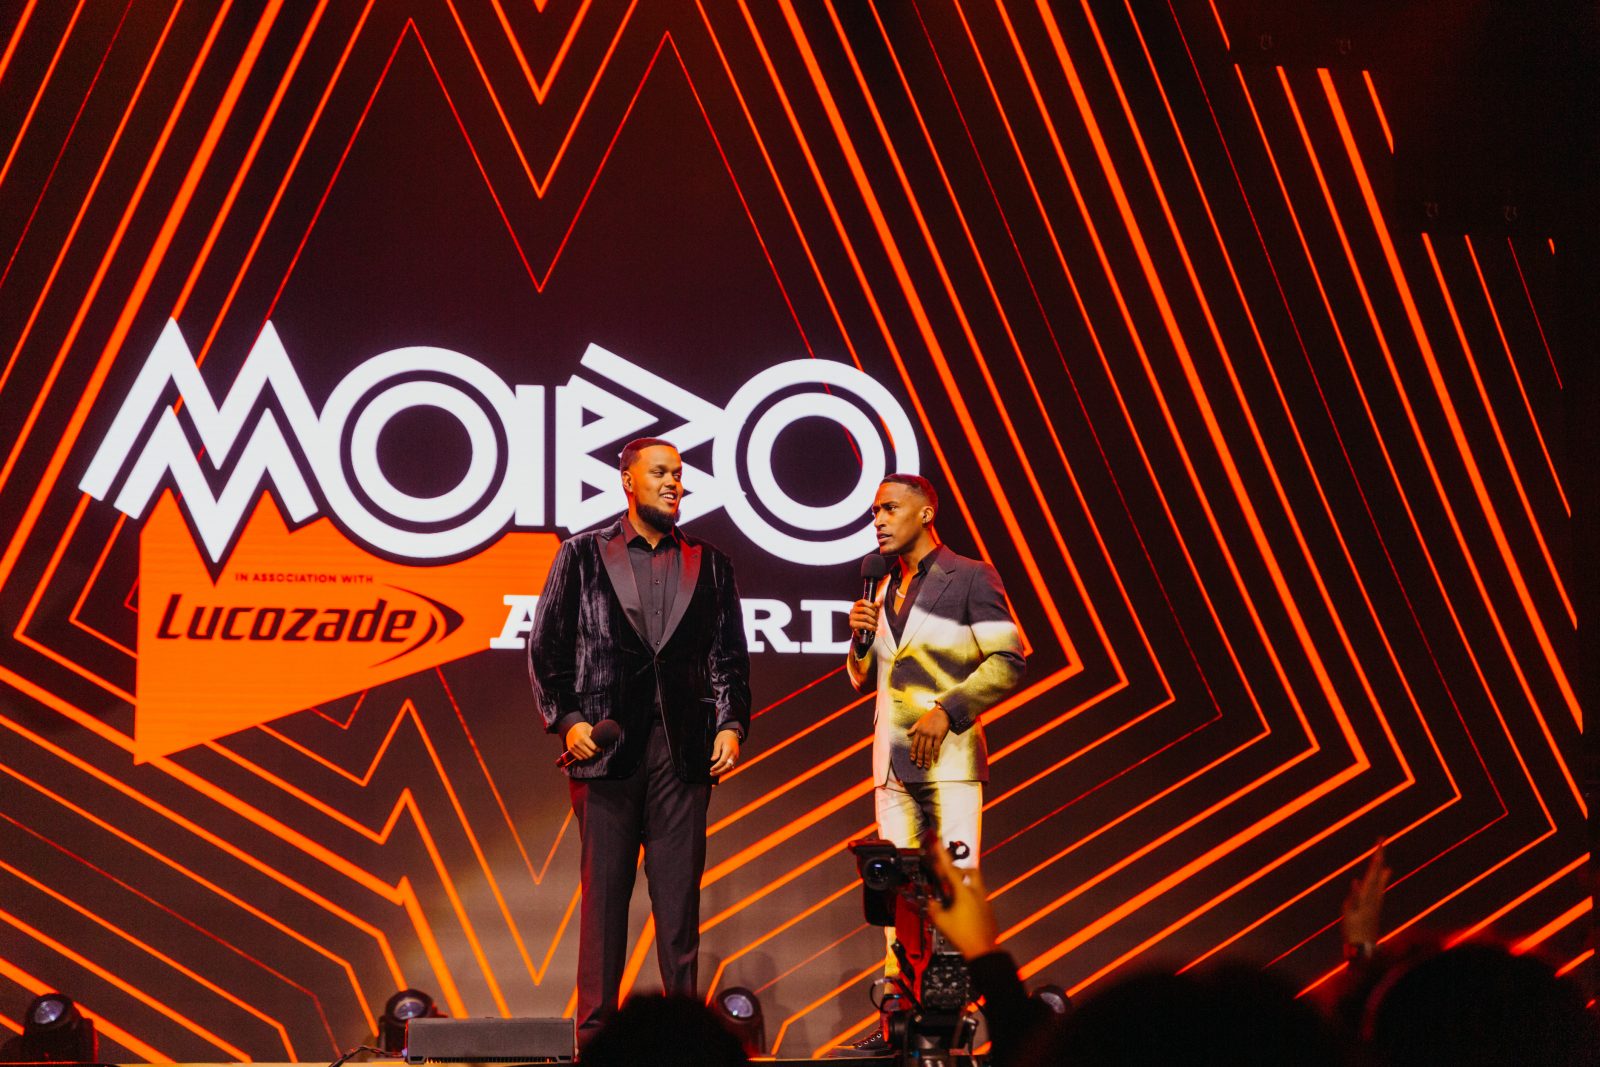 MOBO Award sign with microphone.